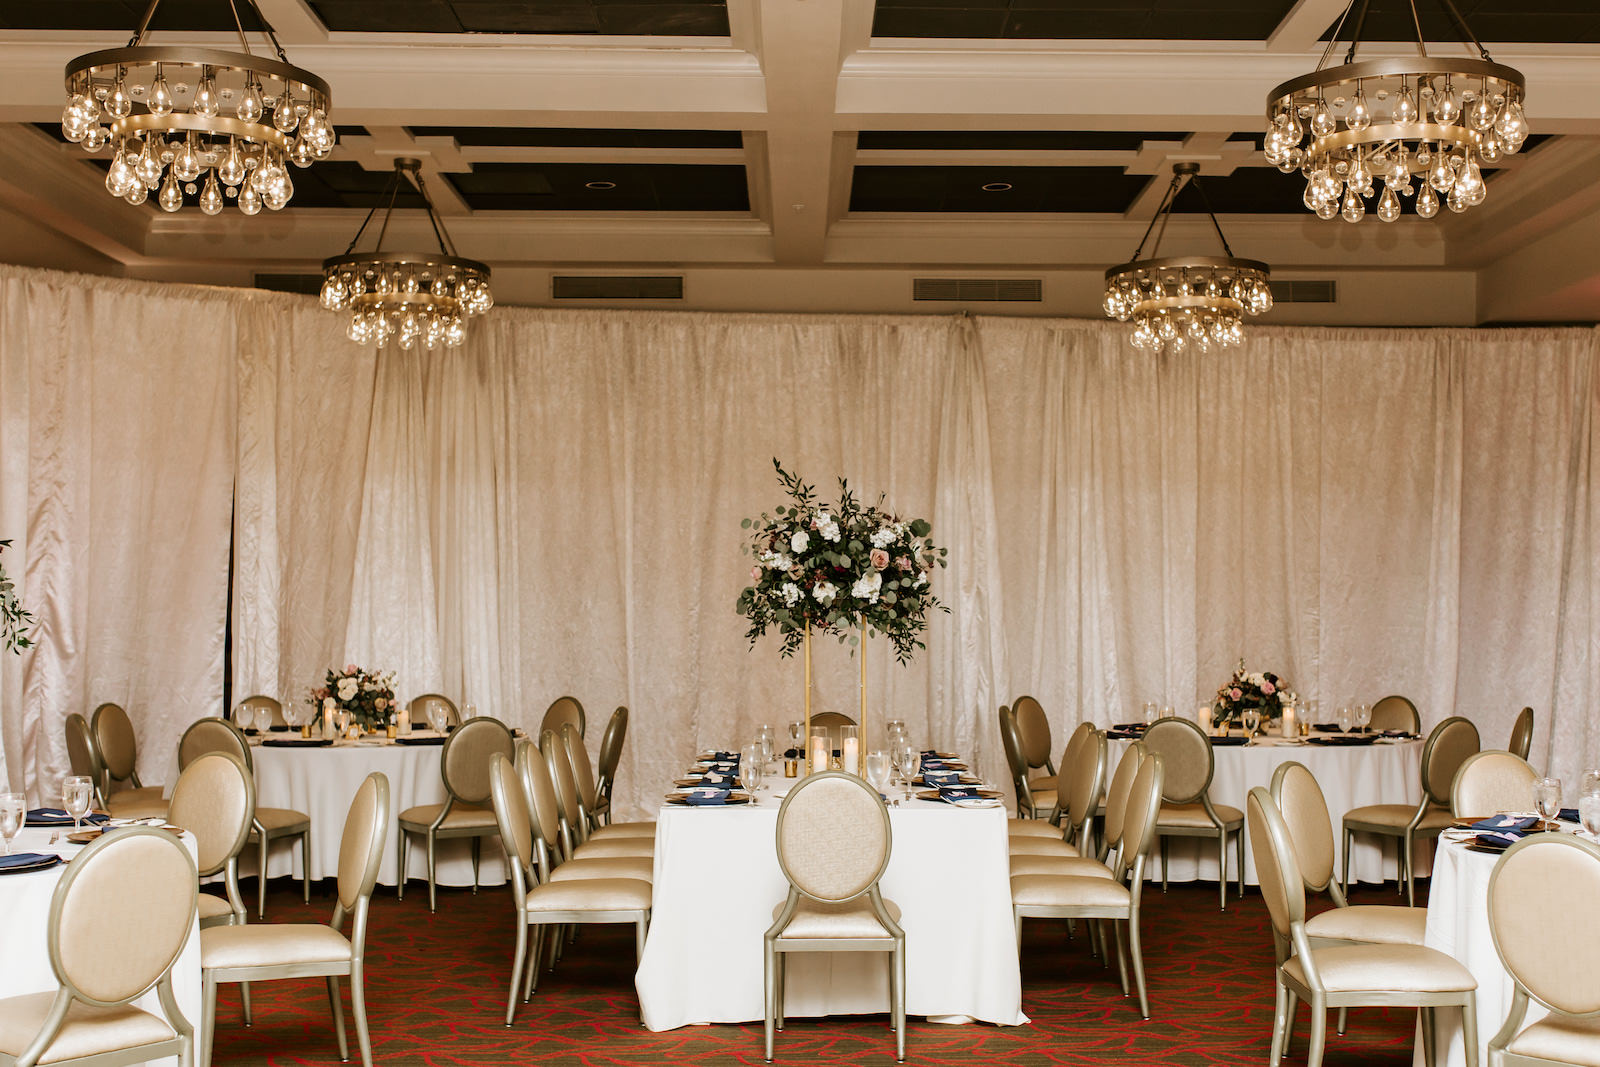 Indoor Hotel Ballroom Reception at St. Pete Wedding Venue The Birchwood | Ivory Pipe and Drape | Reception Tables with Gold Banquet Chairs and Ivory Table Linens | Tall Gold Metal Centerpiece Stand with Loose Natural Eucalyptus Greenery and Ivory and Pink Roses